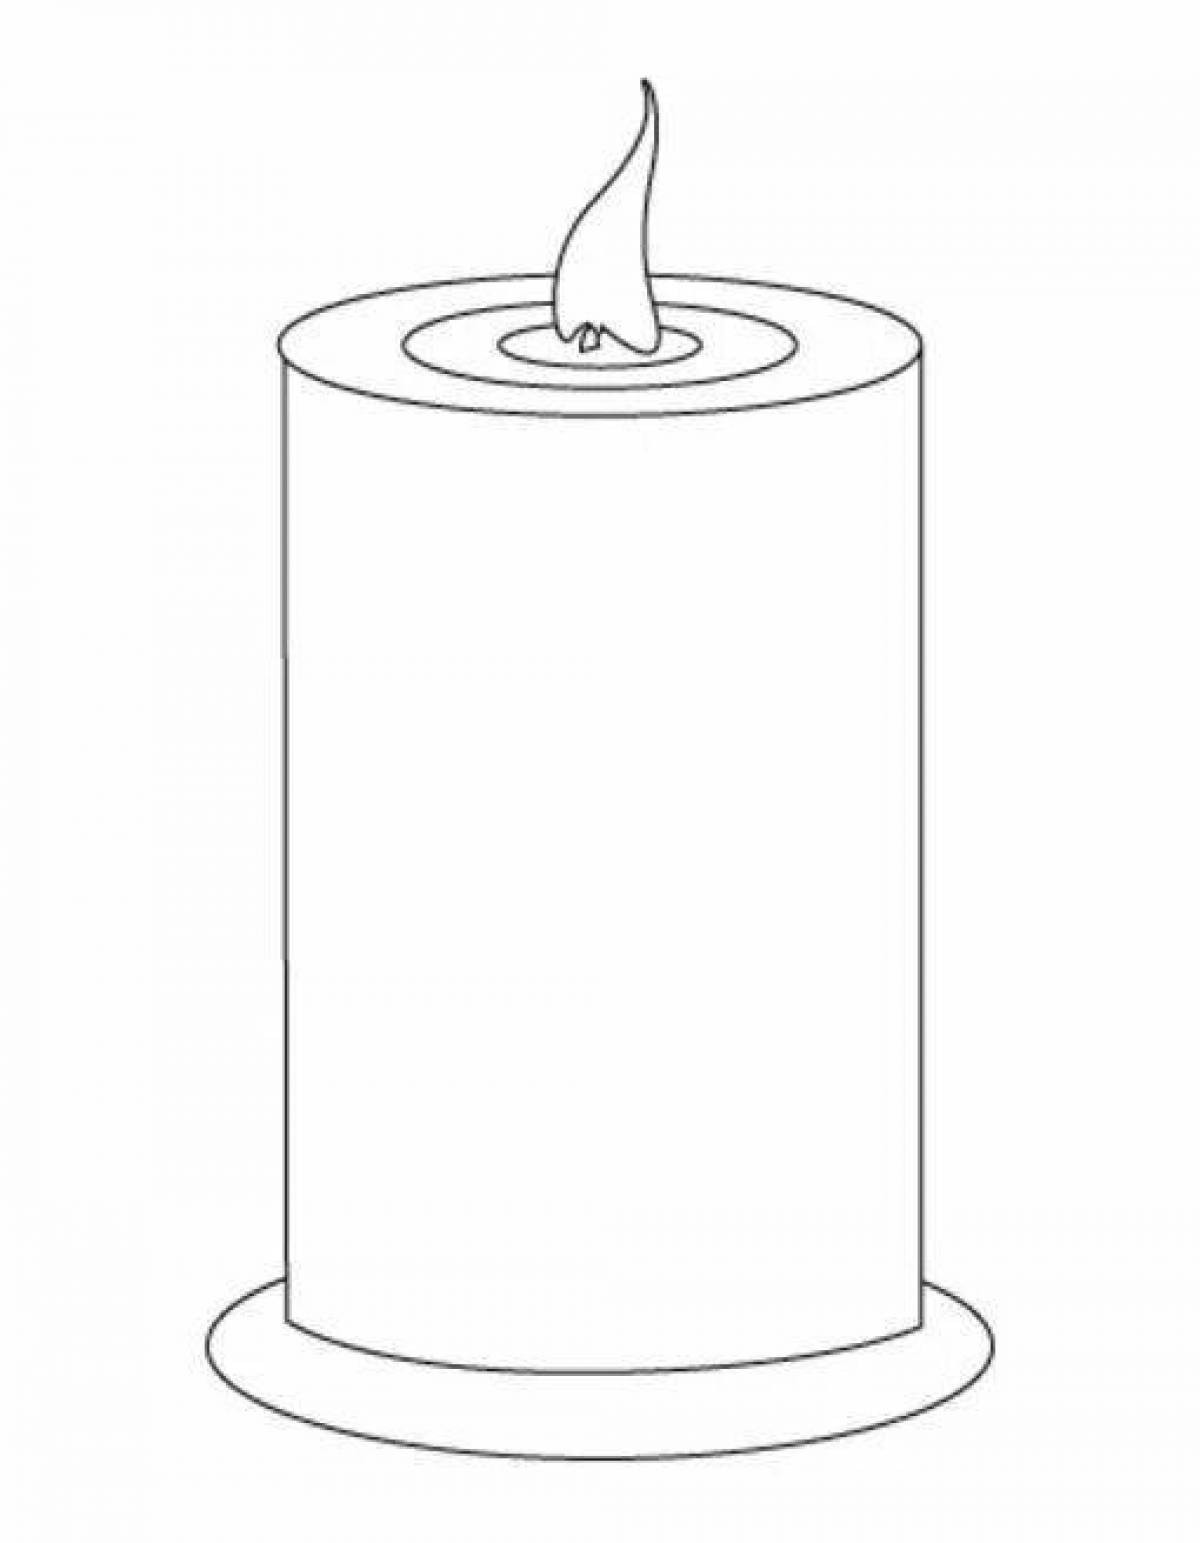 Fun memory candle coloring page